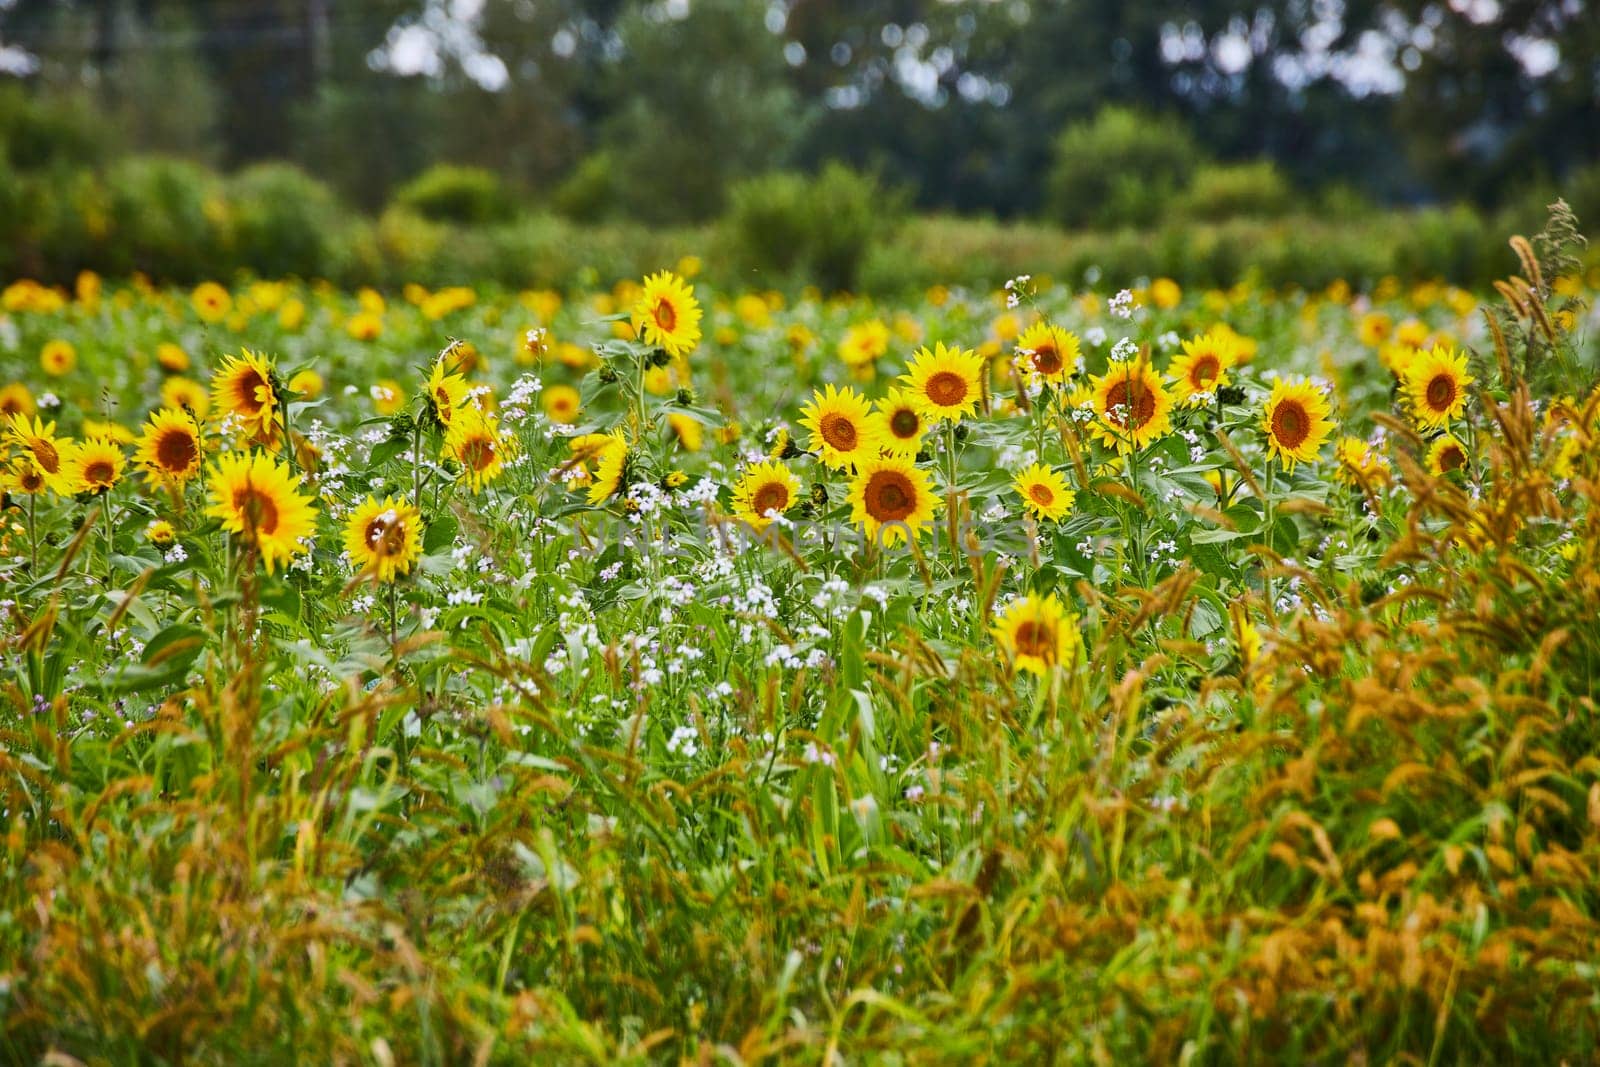 Vibrant Sunflower Field in Goshen, Indiana - A Daytime Display of Growth and Sustainability, 2023